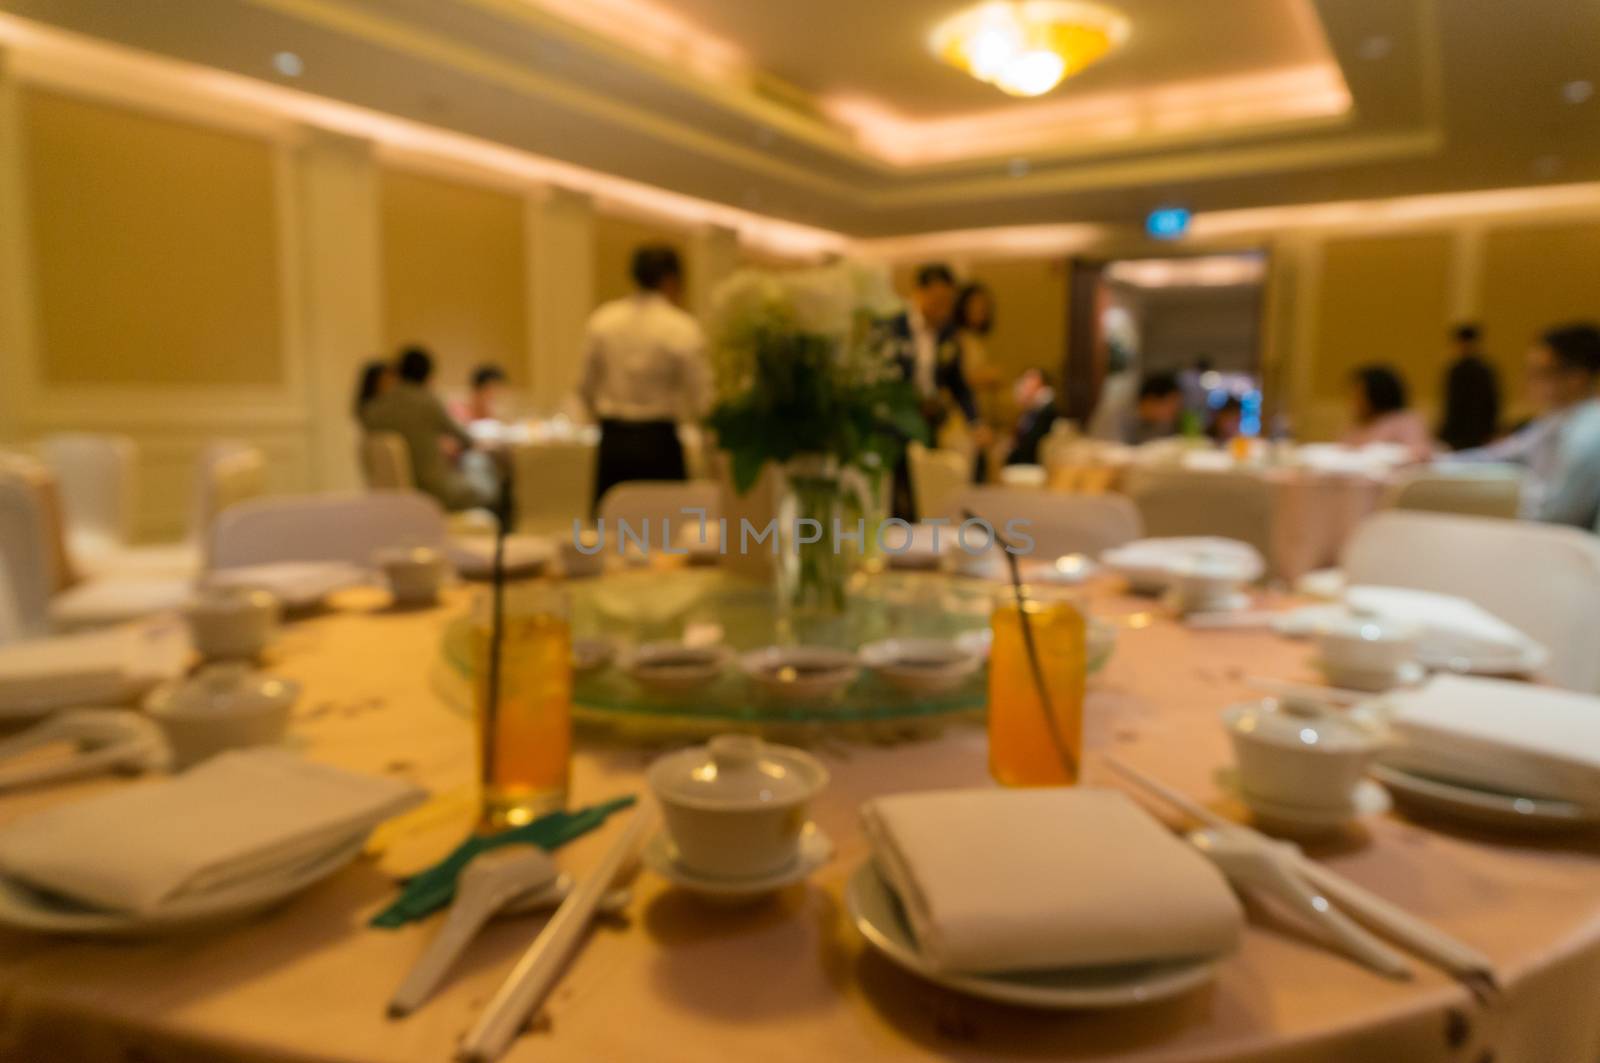 blurred image of Large dining table set for wedding, dinner or f by thampapon